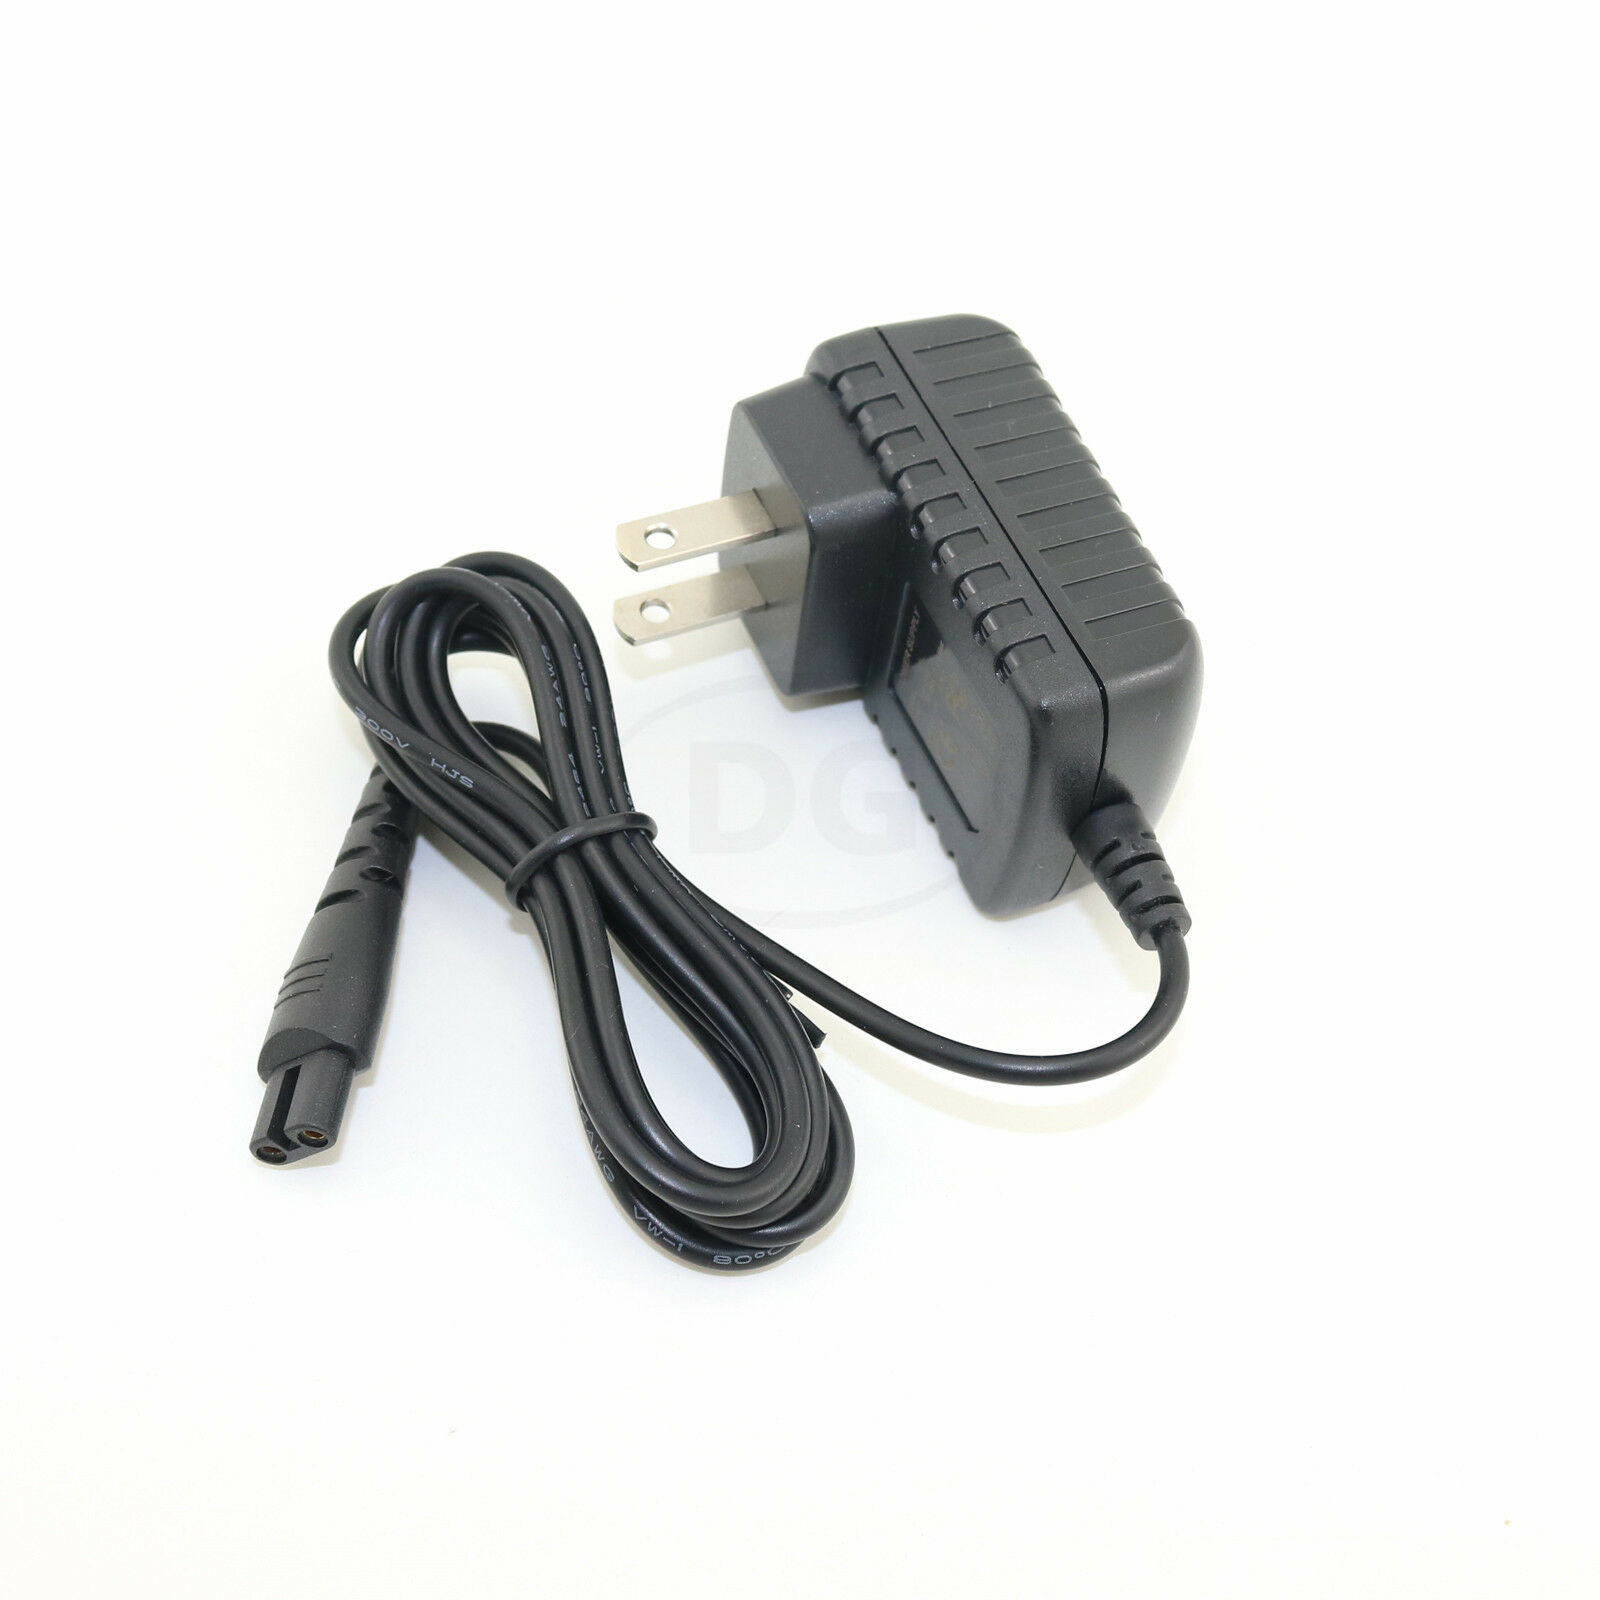 Remington RS-8986 AC Adapter Power Supply Cord Cable Charger